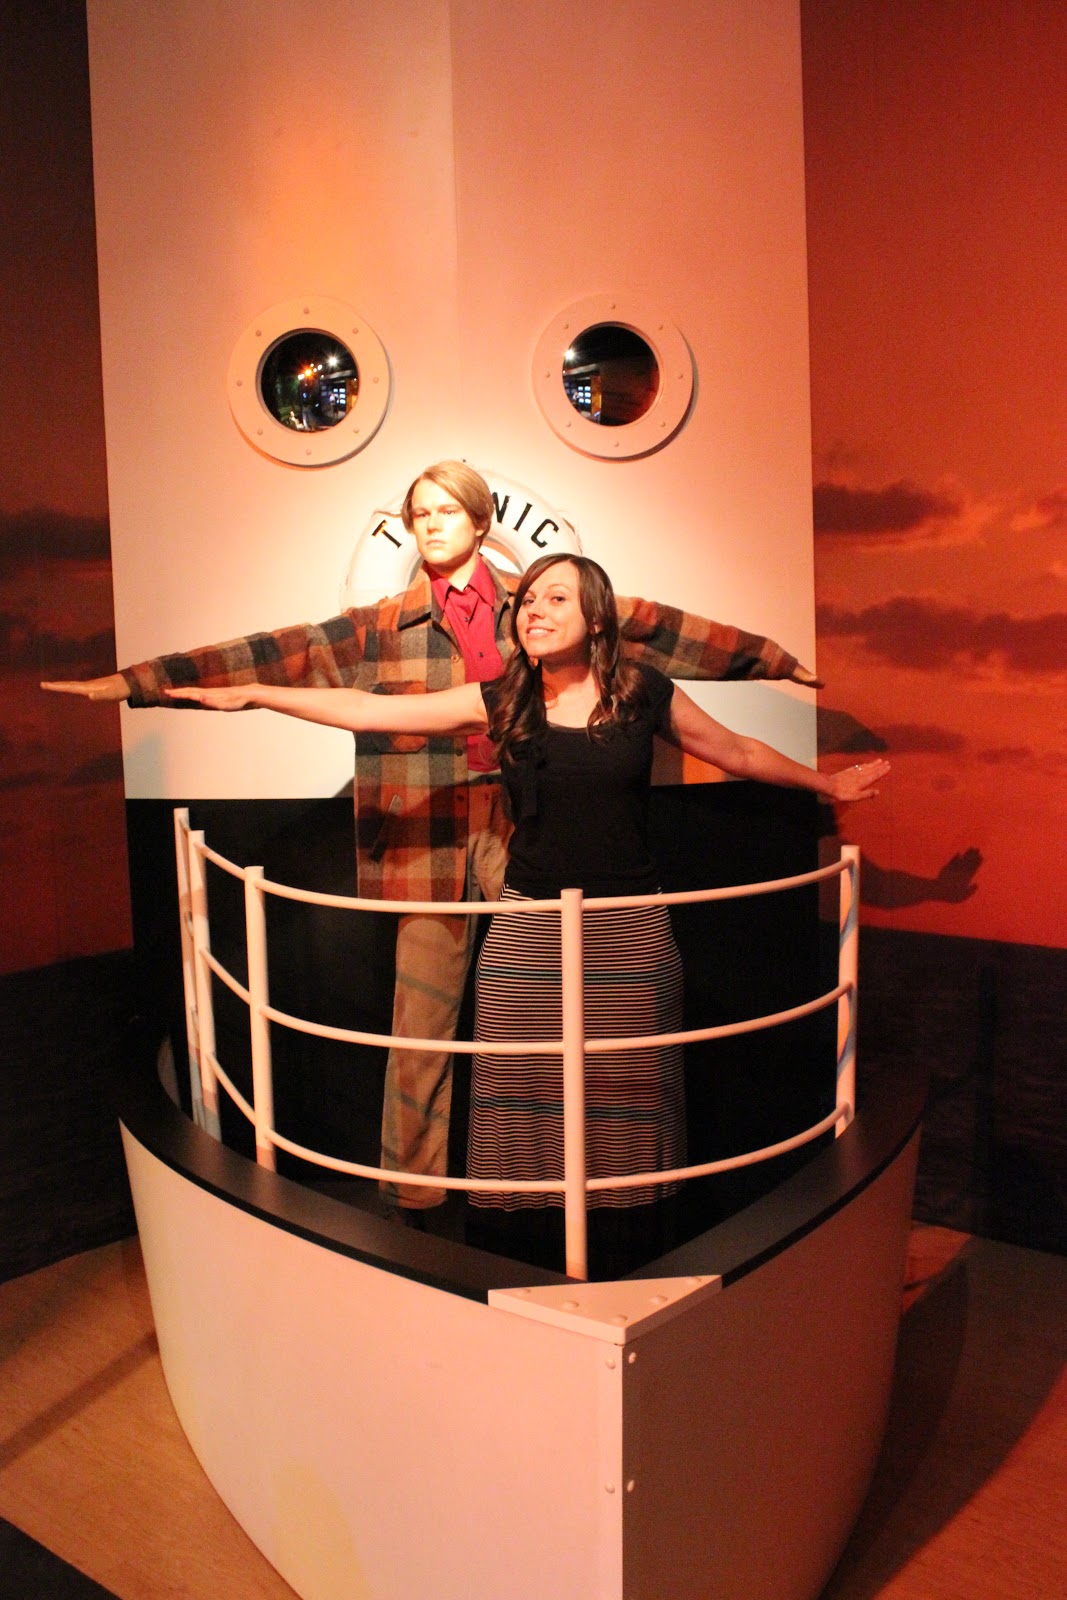 Titanic wax figures at the Wax Museum. 